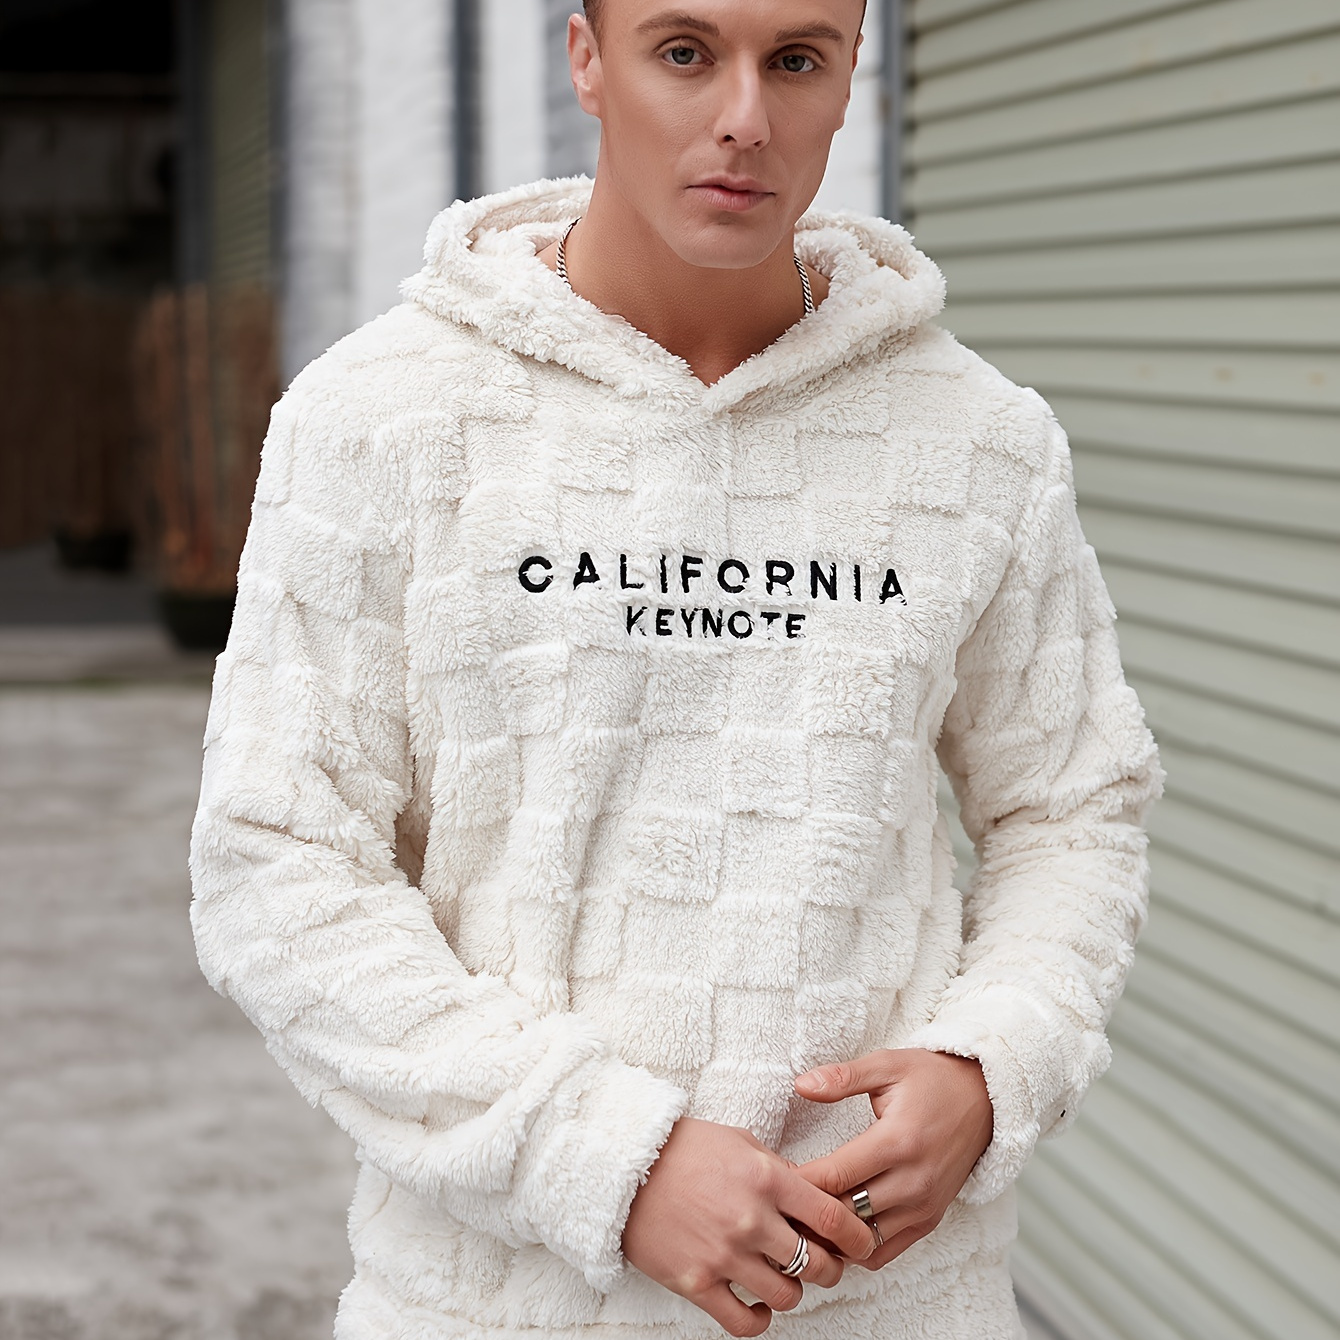 

Chic Design Men's Plaid Pattern And Textured Hooded Sweatshirt With "california Keynote" Letter Embroidery, Trendy Fleece Hoodie For Daily Outerwear